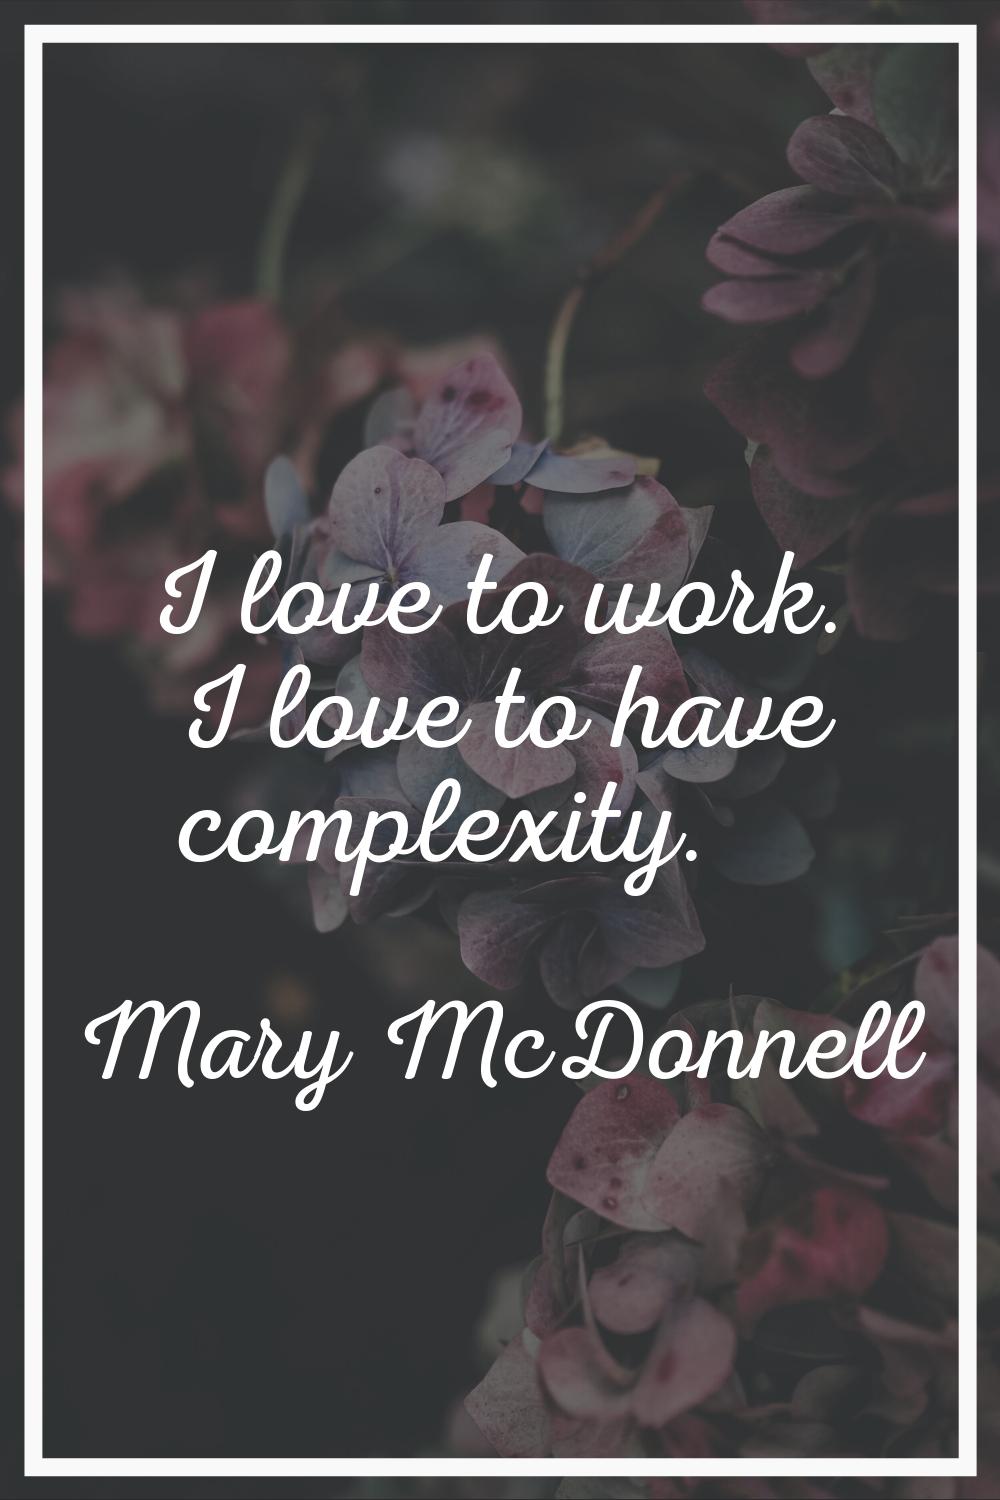 I love to work. I love to have complexity.